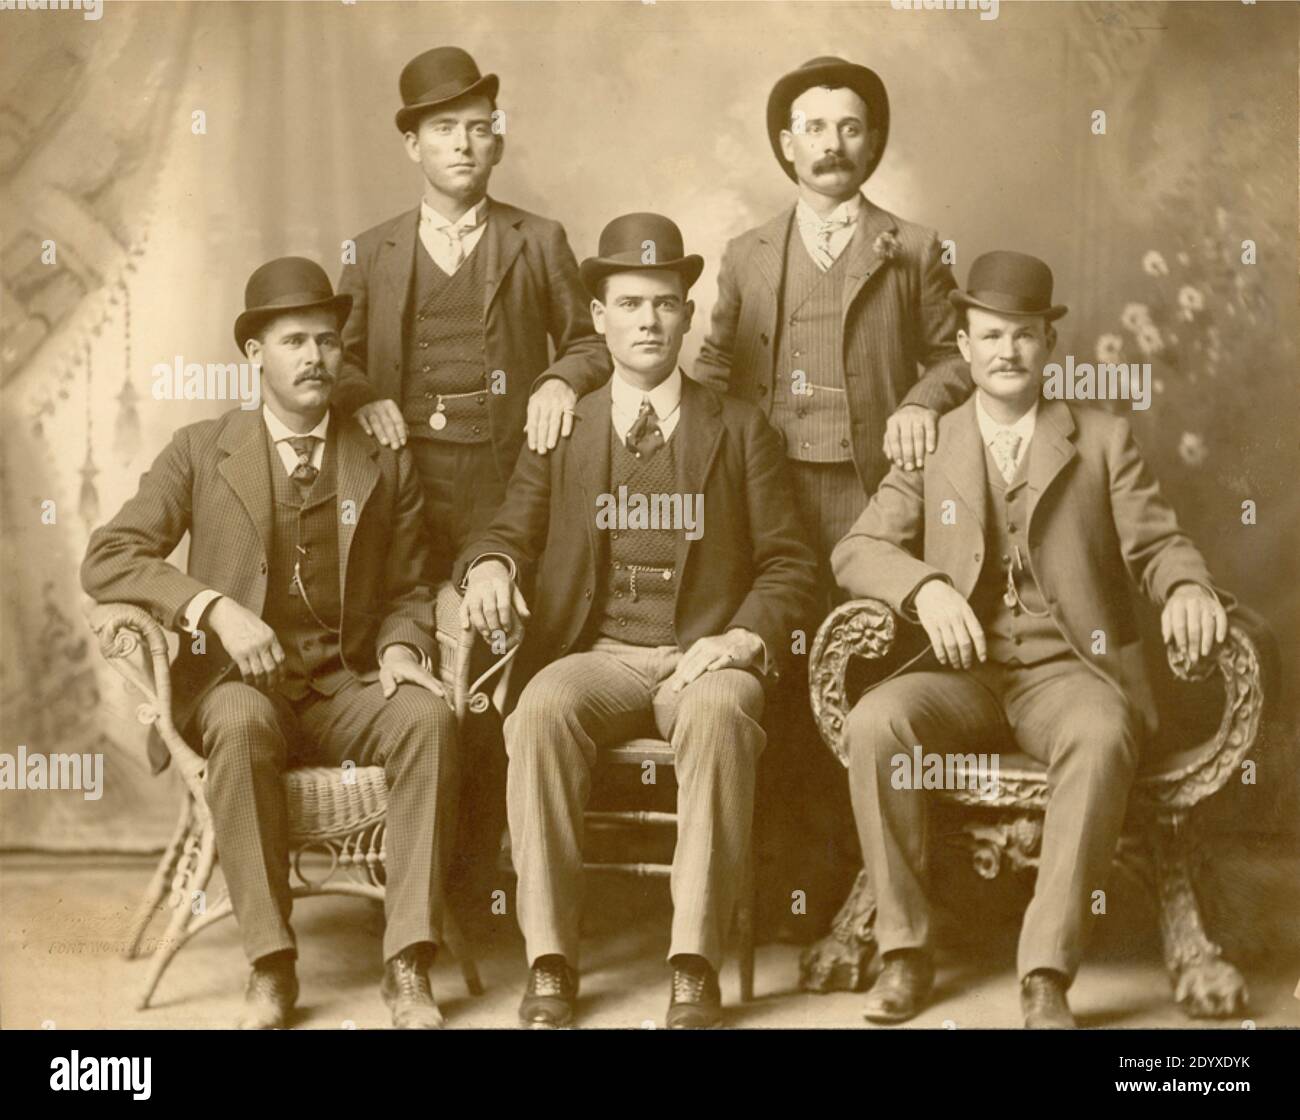 Butch Cacsidy and the Sundance Kid with the Wild Bunch Stock Photo